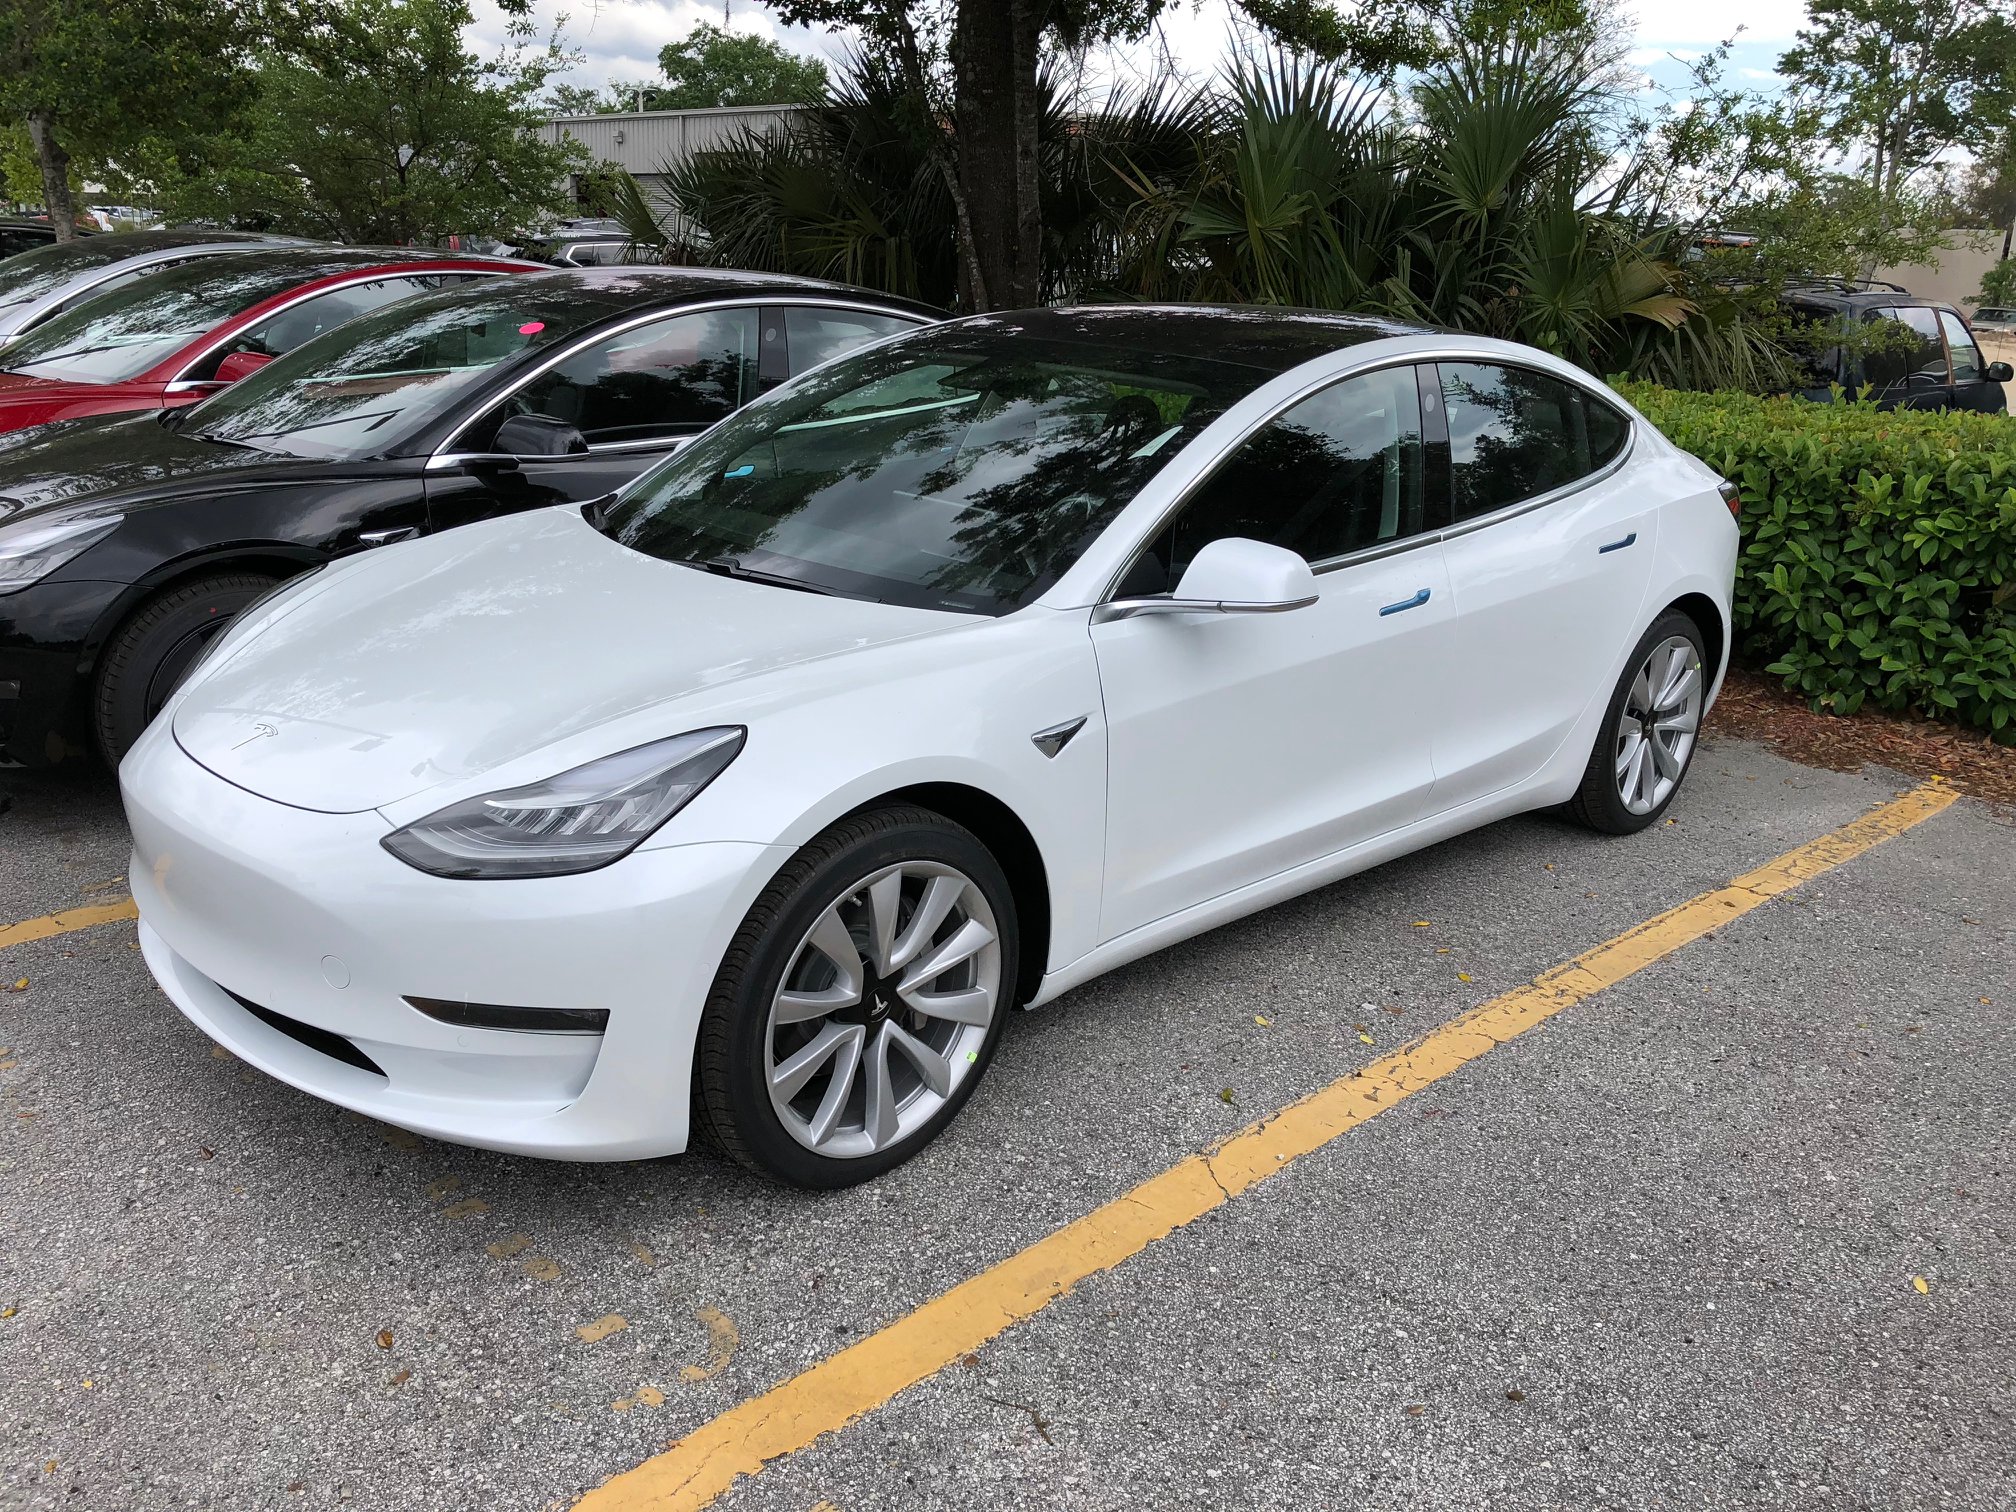 Tesla's Jacksonville Florida store gets flooded with Model 3 vehicles